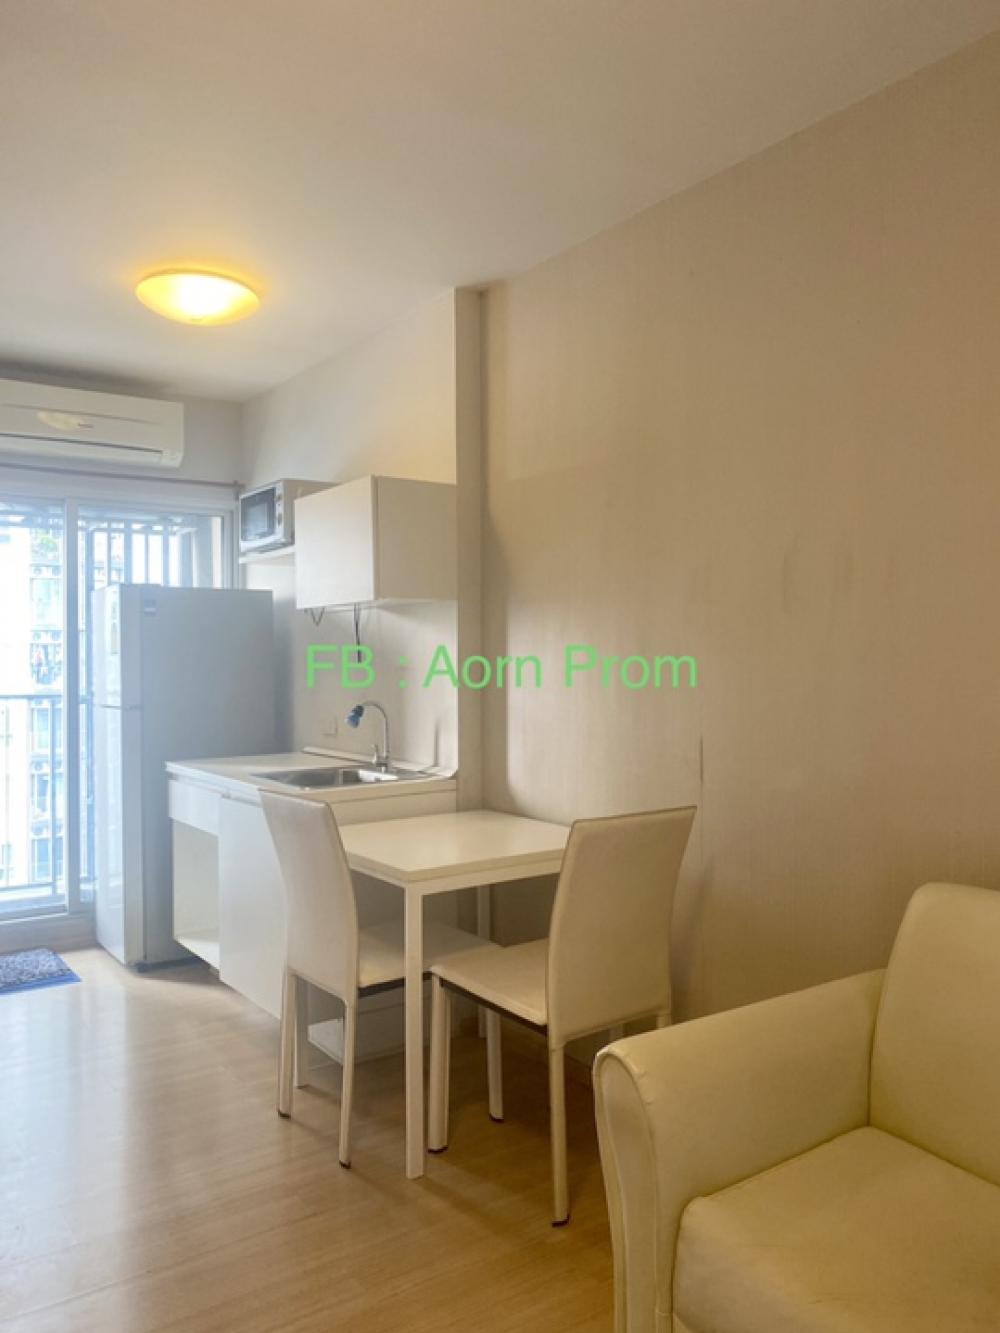 For RentCondoBang kae, Phetkasem : For rent, Plum Condo Bangkae (Plum Condo Bangkae), near MRT Lak Song, large room 30 sq m., separate bedroom, building A, pool view, condo next to it, there are 2 air conditioners, 40-inch large-screen TVs, microwaves. , 2 door refrigerator, water heater f